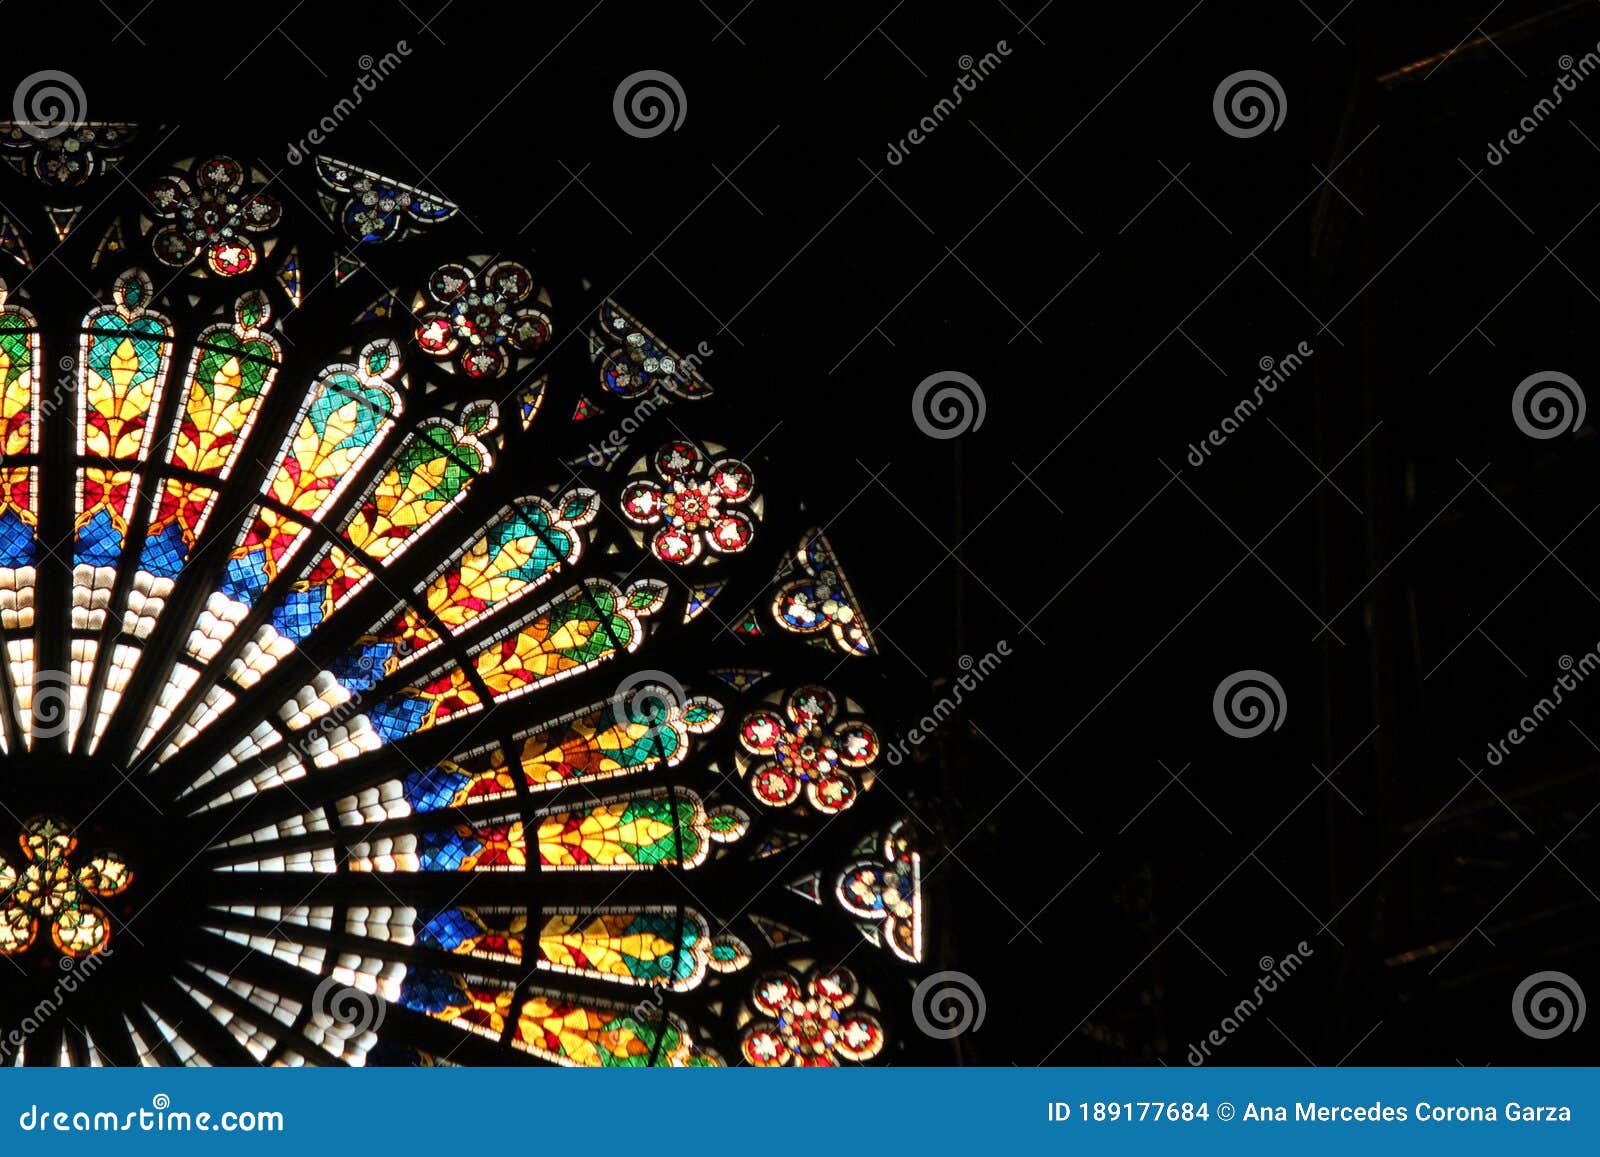 Colorful Rose Window Inside the Strasbourg Cathedral. Stock Photo